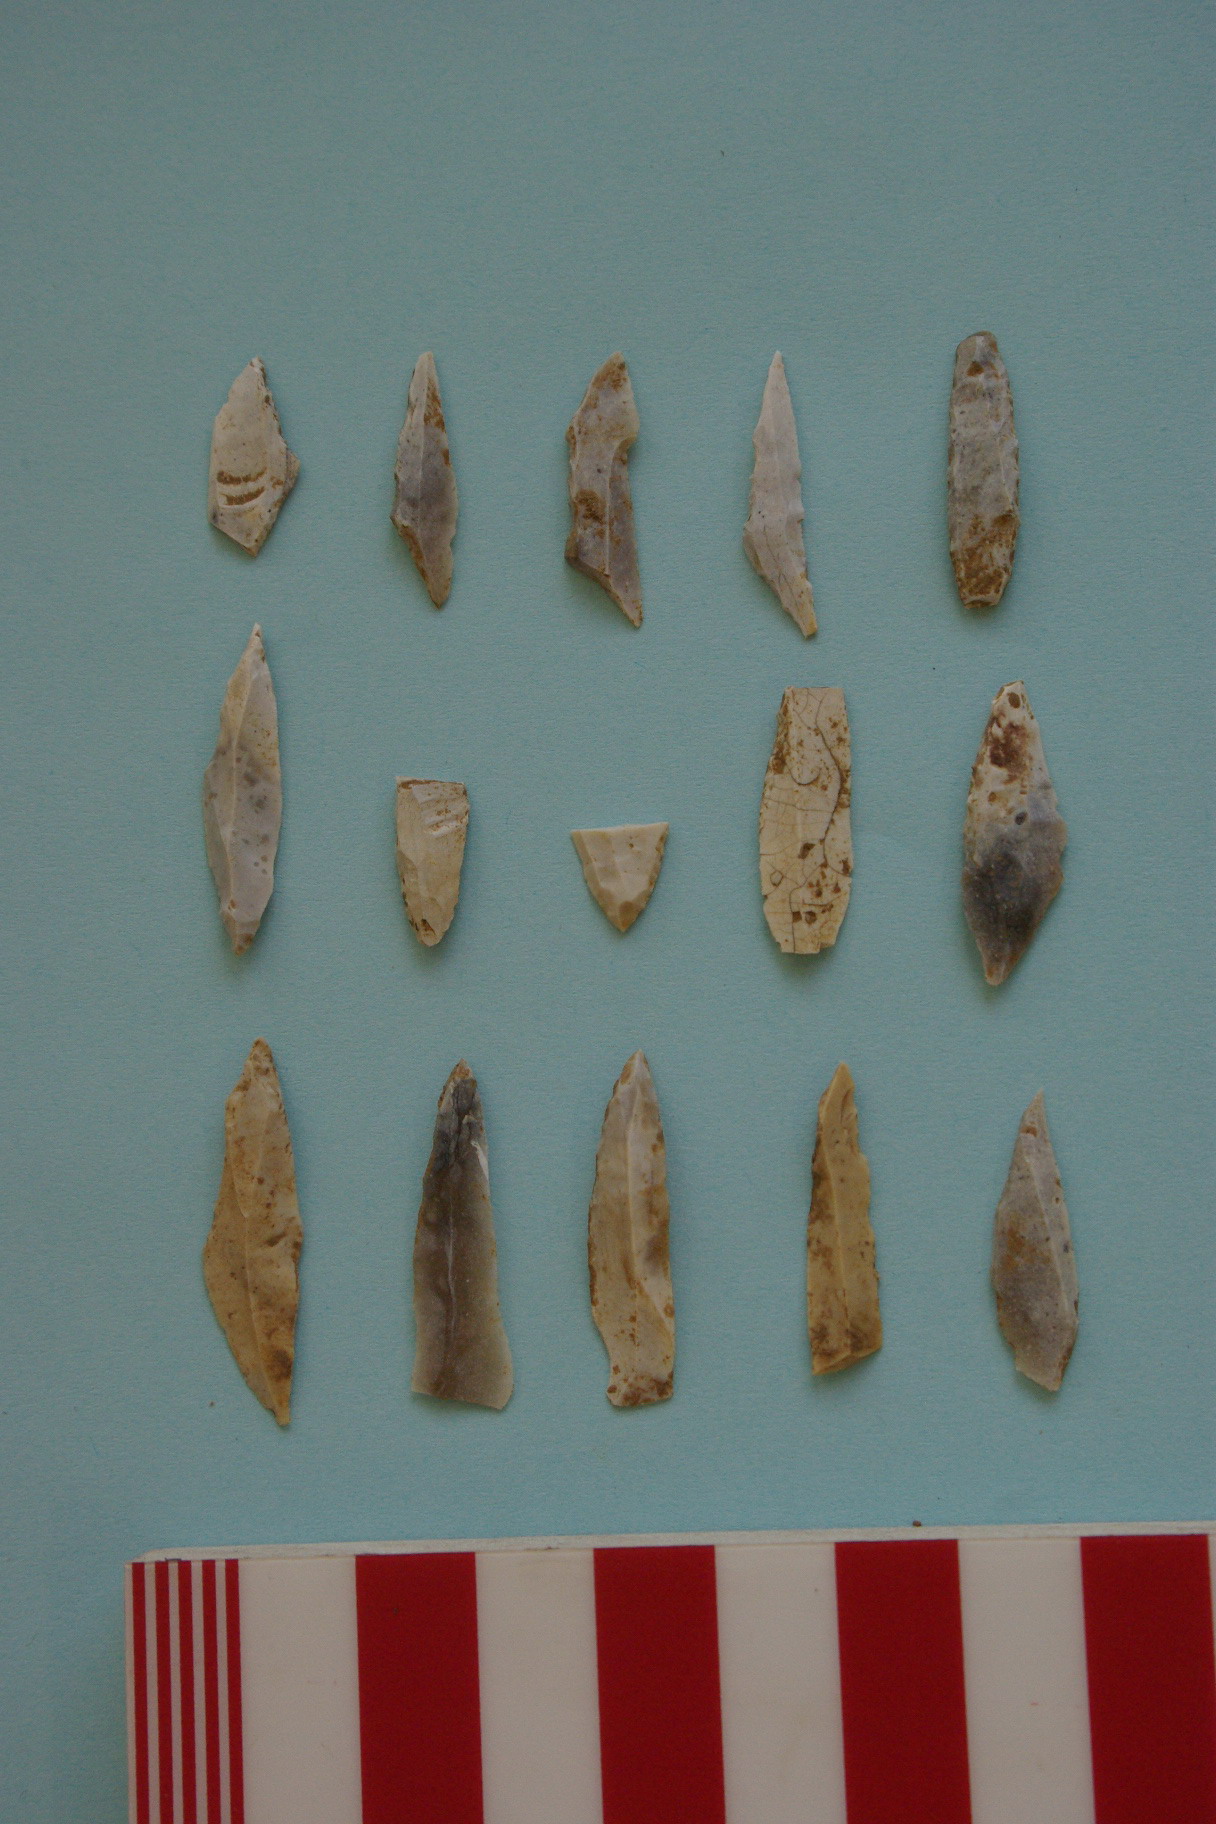 A photo of fifteen flints, most of which are long and thin and have been worked to sharp points.